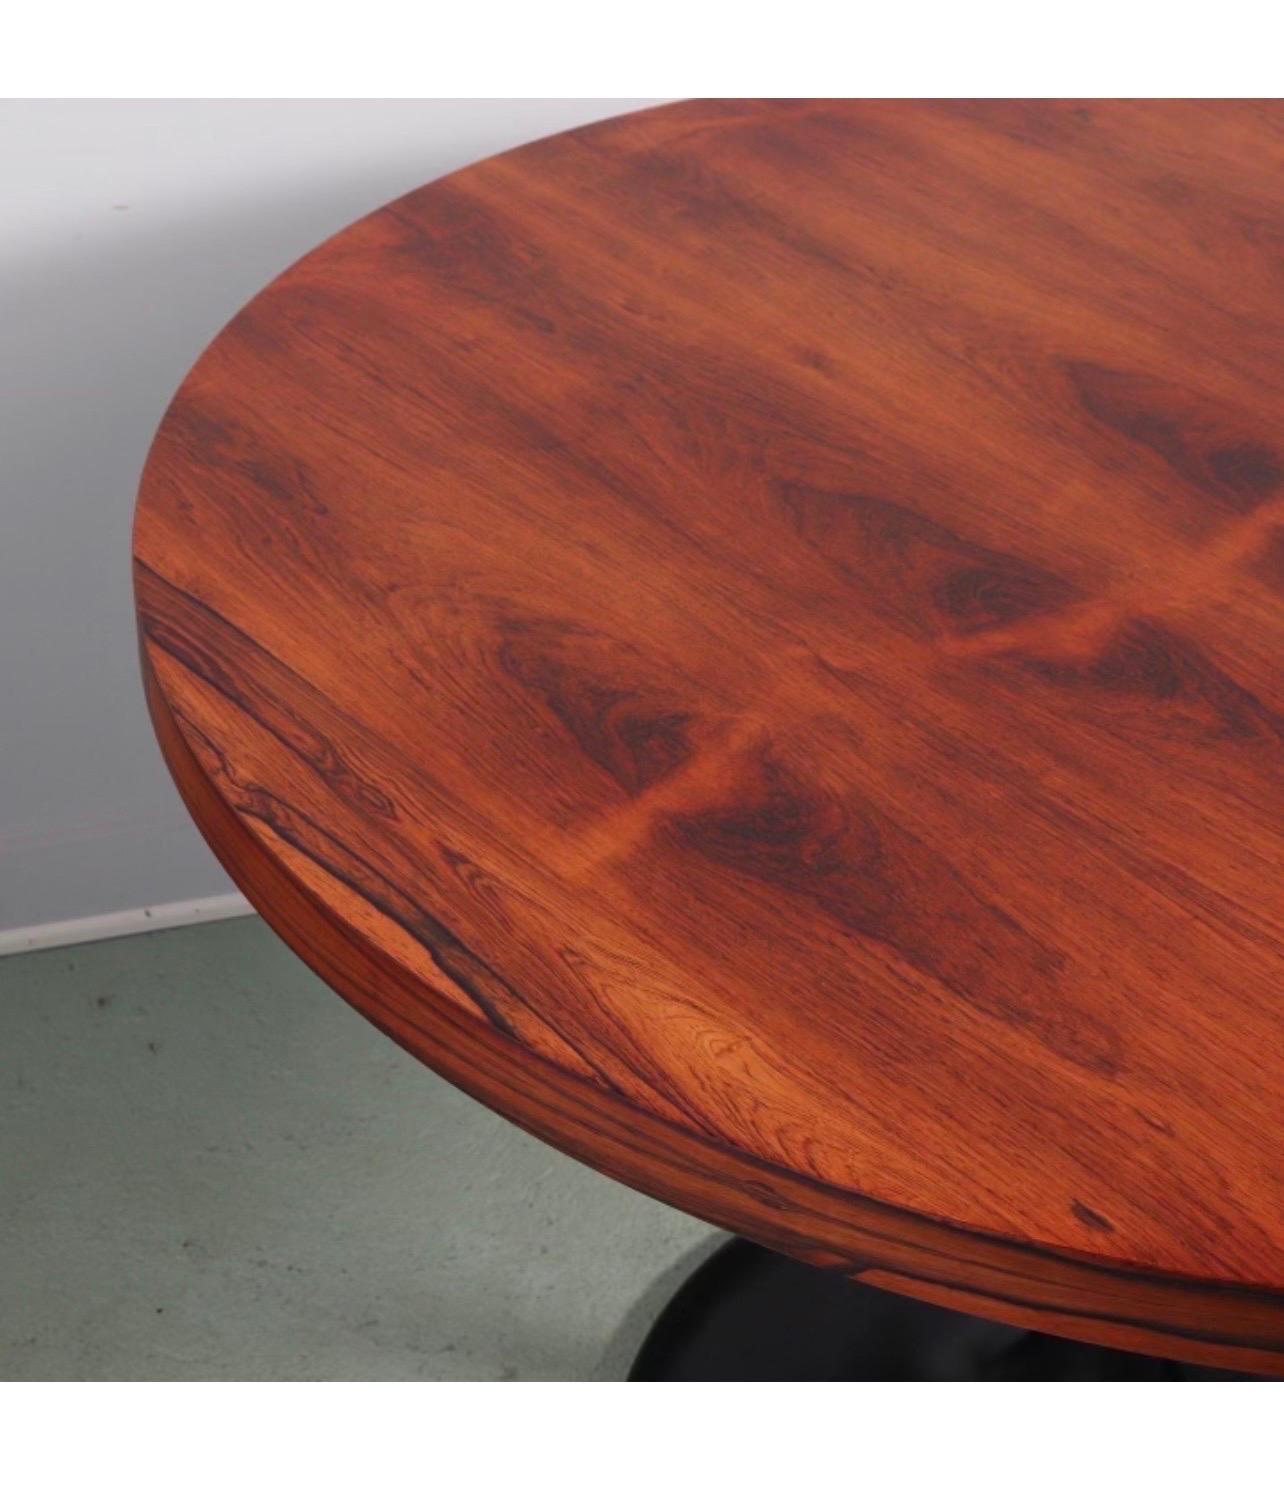 Mid-Century Modern Rosewood Circular Dining or Foyer Table by Milo Baughman with Black Tulip Base